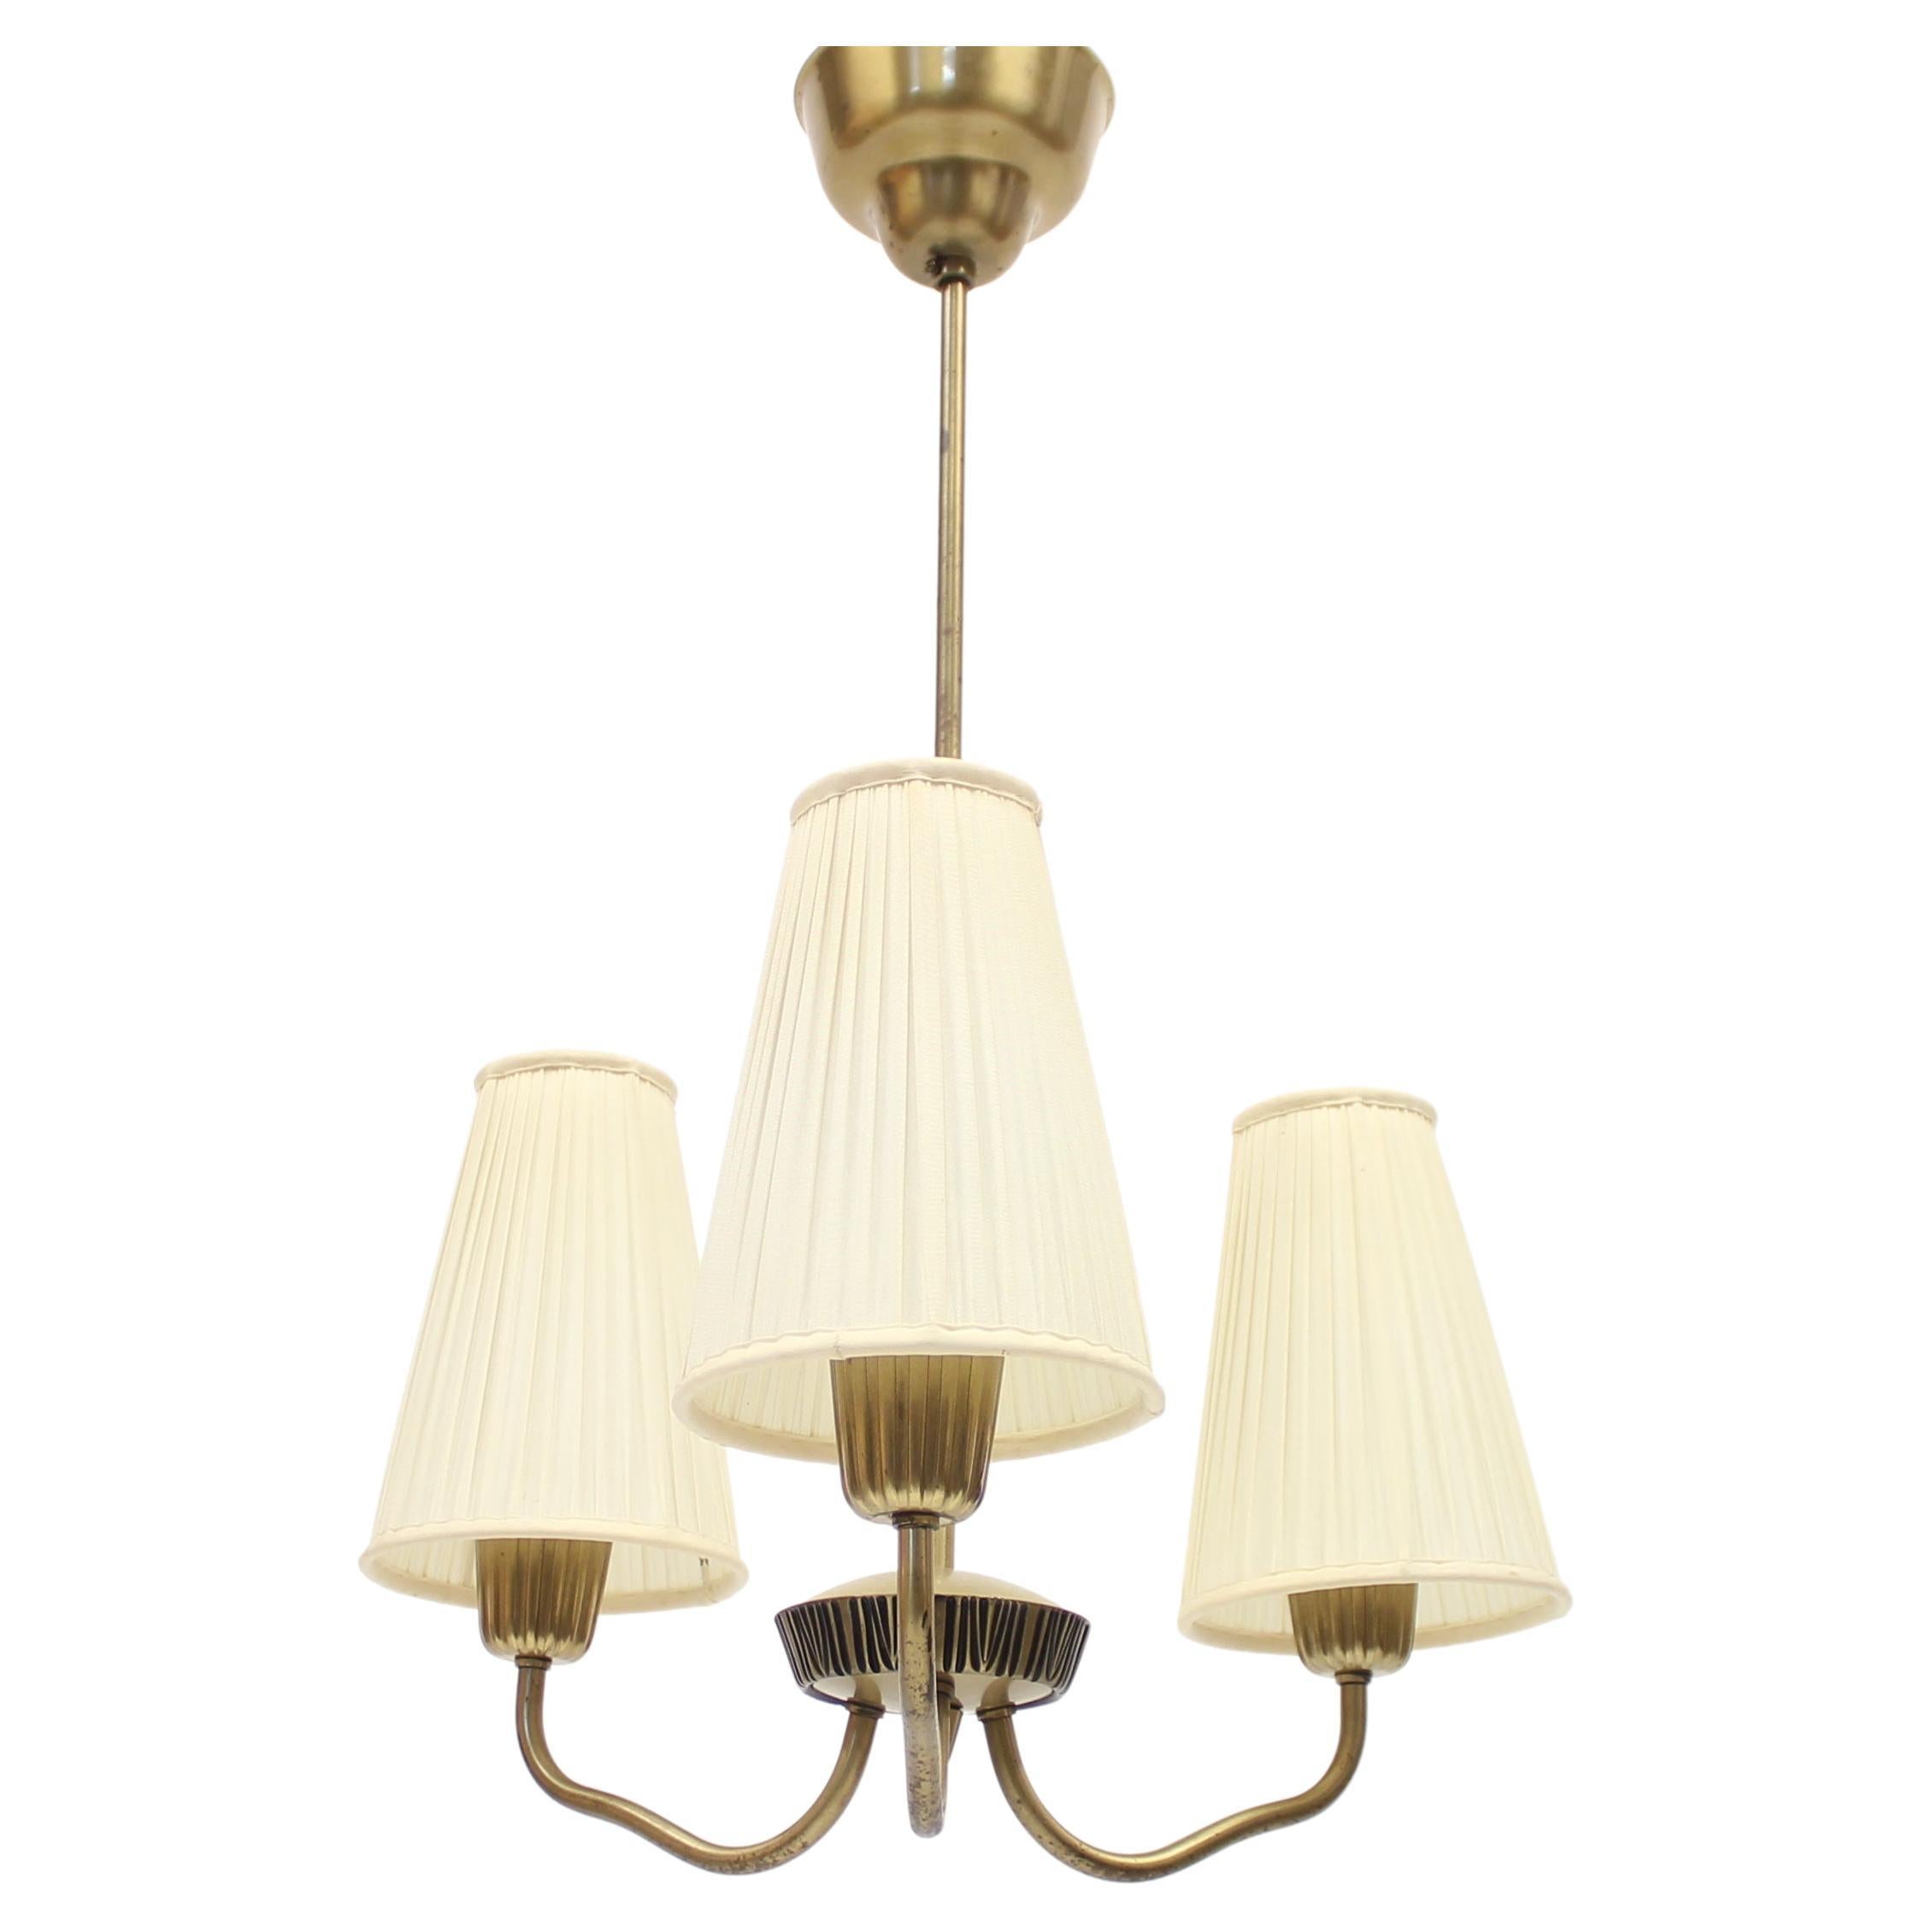 ASEA, 3-Light Brass Ceiling Lamp, Attributed to Sonja Katzin, 1950s